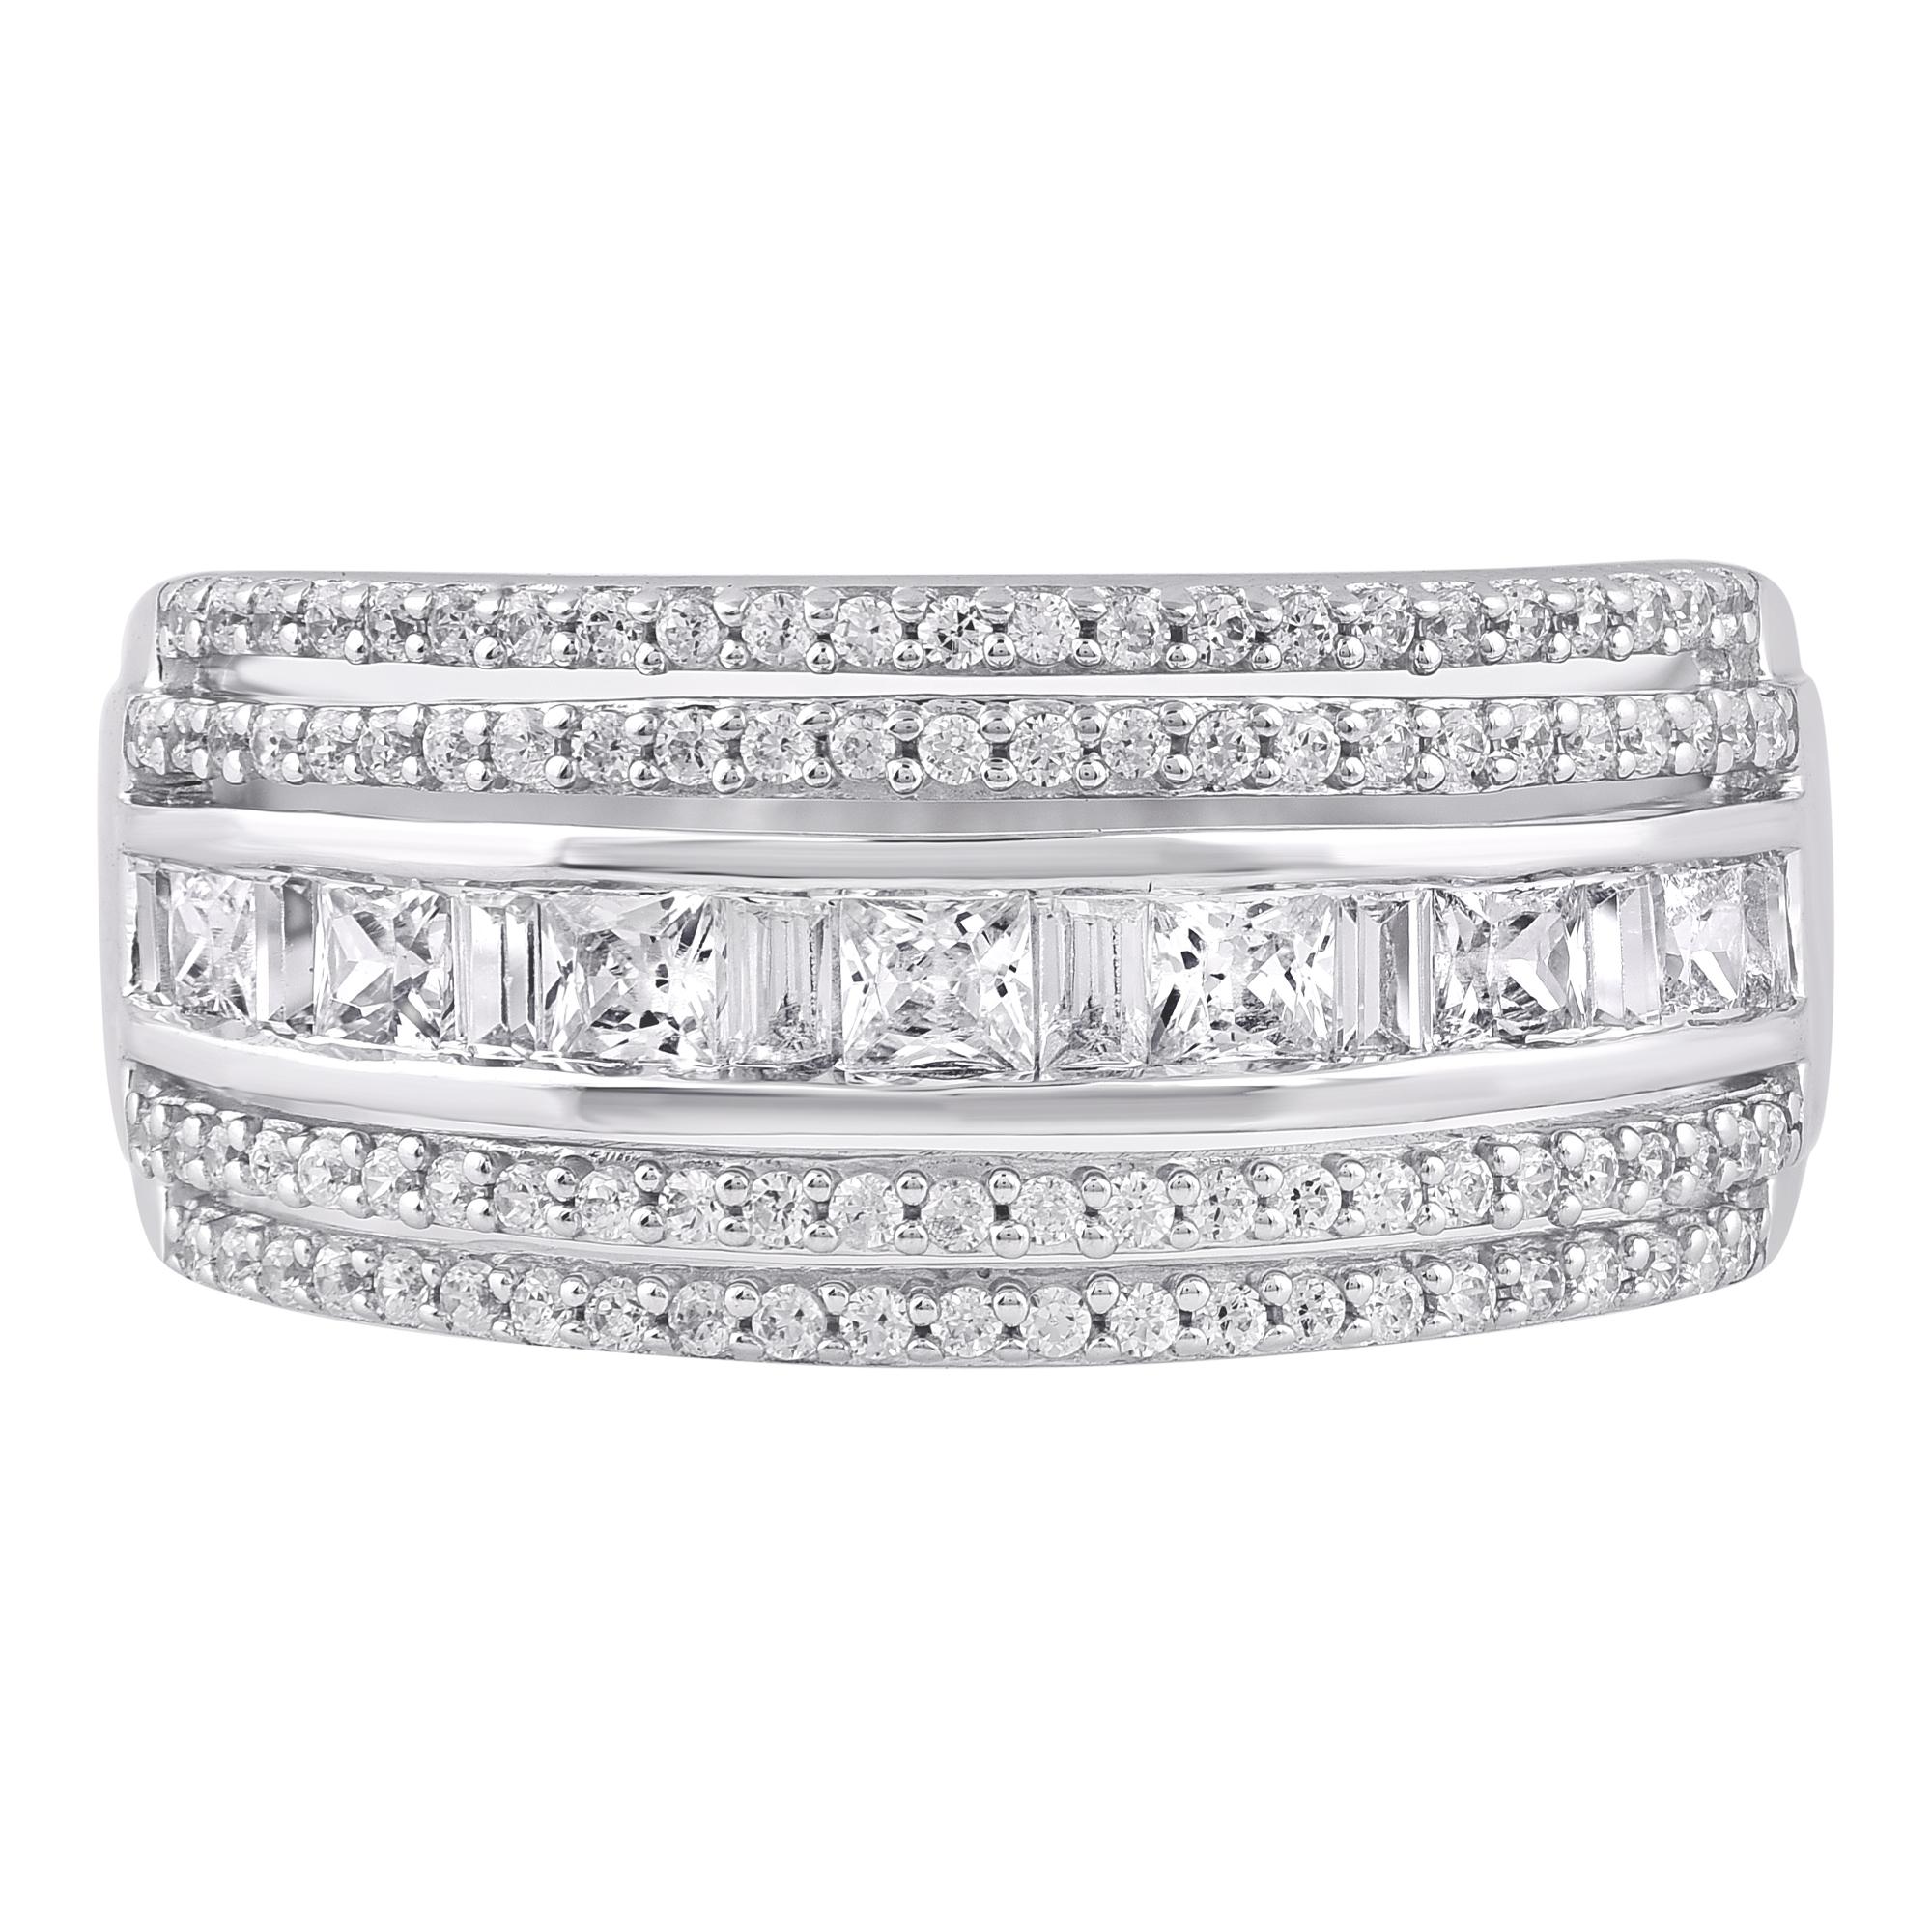 This multi-row  Wide Band Ring is expertly crafted in 14 Karat White Gold and features 96 Round, 8 baguette and 7 princess-cut White diamonds set in channel and prong settings a beautiful design forming a unique pattern. This ring has high polish